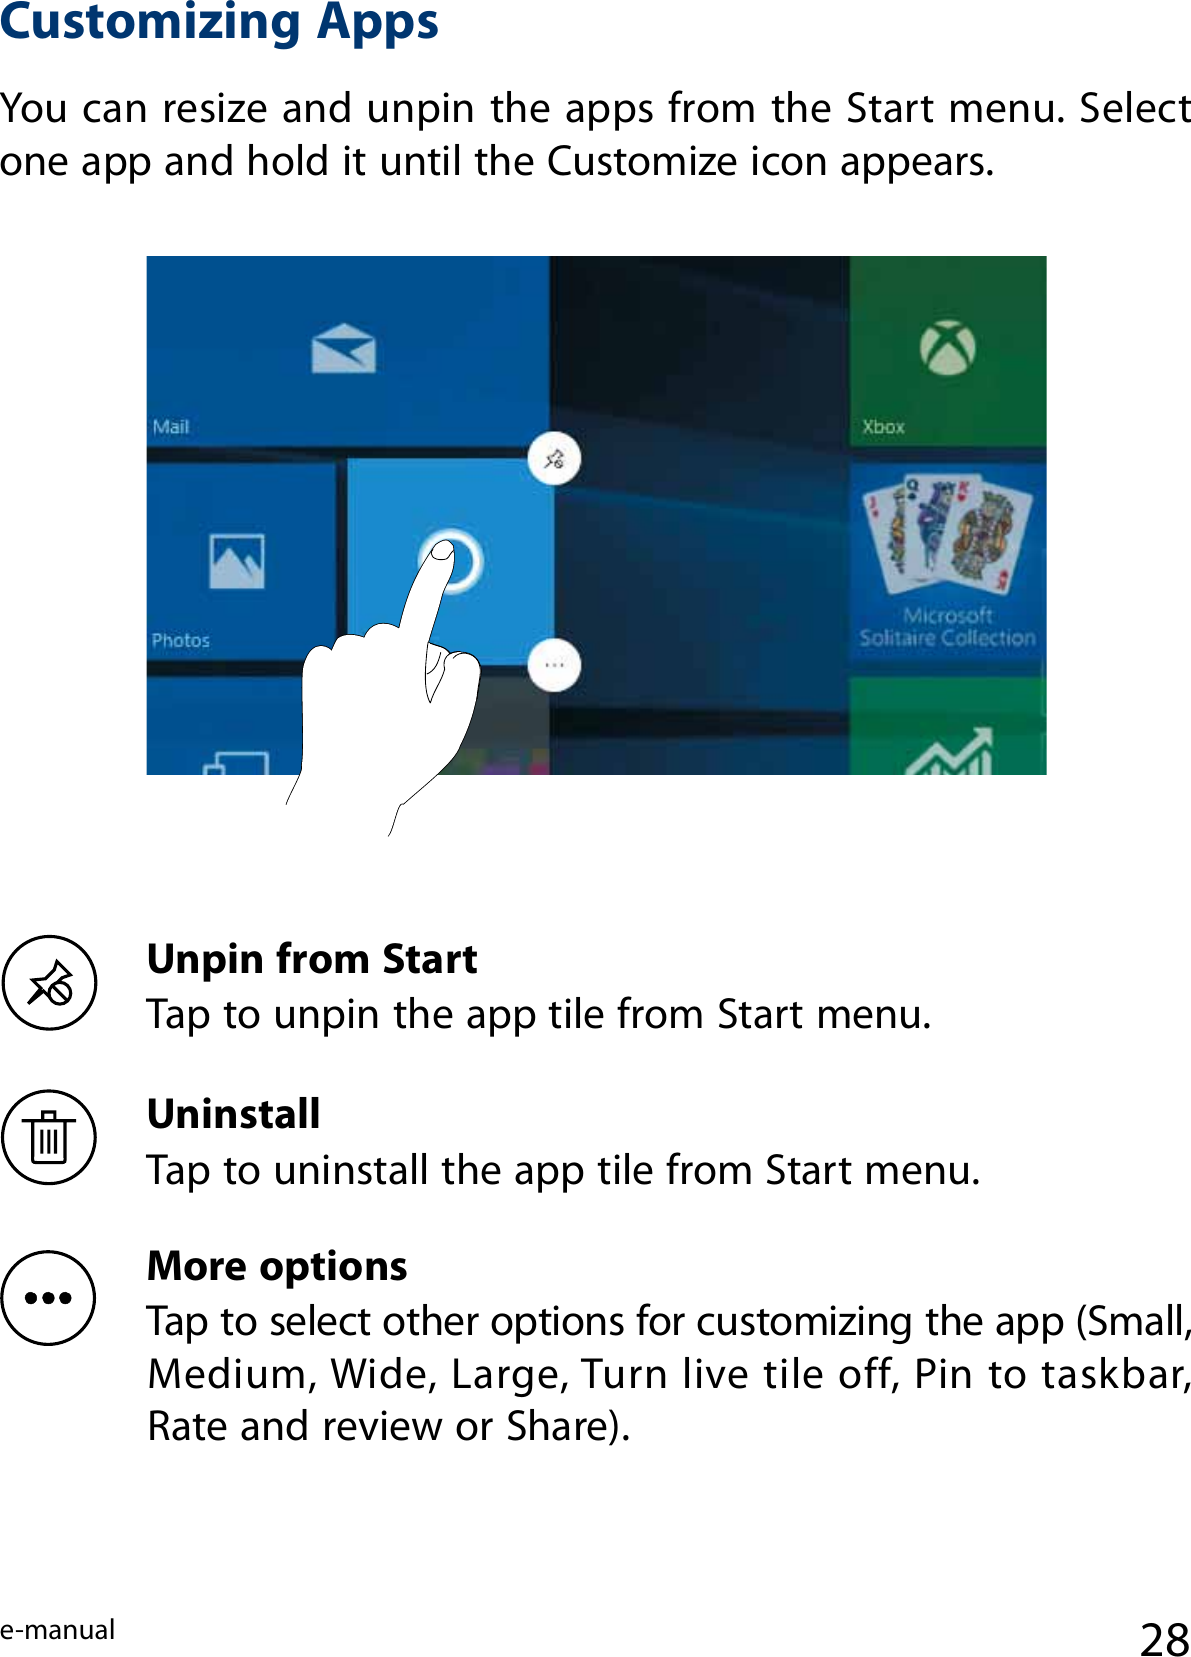 e-manual 28Customizing AppsYou can resize and unpin the apps from the Start menu. Select one app and hold it until the Customize icon appears.Unpin from Start Tap to unpin the app tile from Start menu.Uninstall Tap to uninstall the app tile from Start menu.More options Tap to select other options for customizing the app (Small, Medium, Wide, Large, Turn live tile off, Pin to taskbar,  Rate and review or Share).